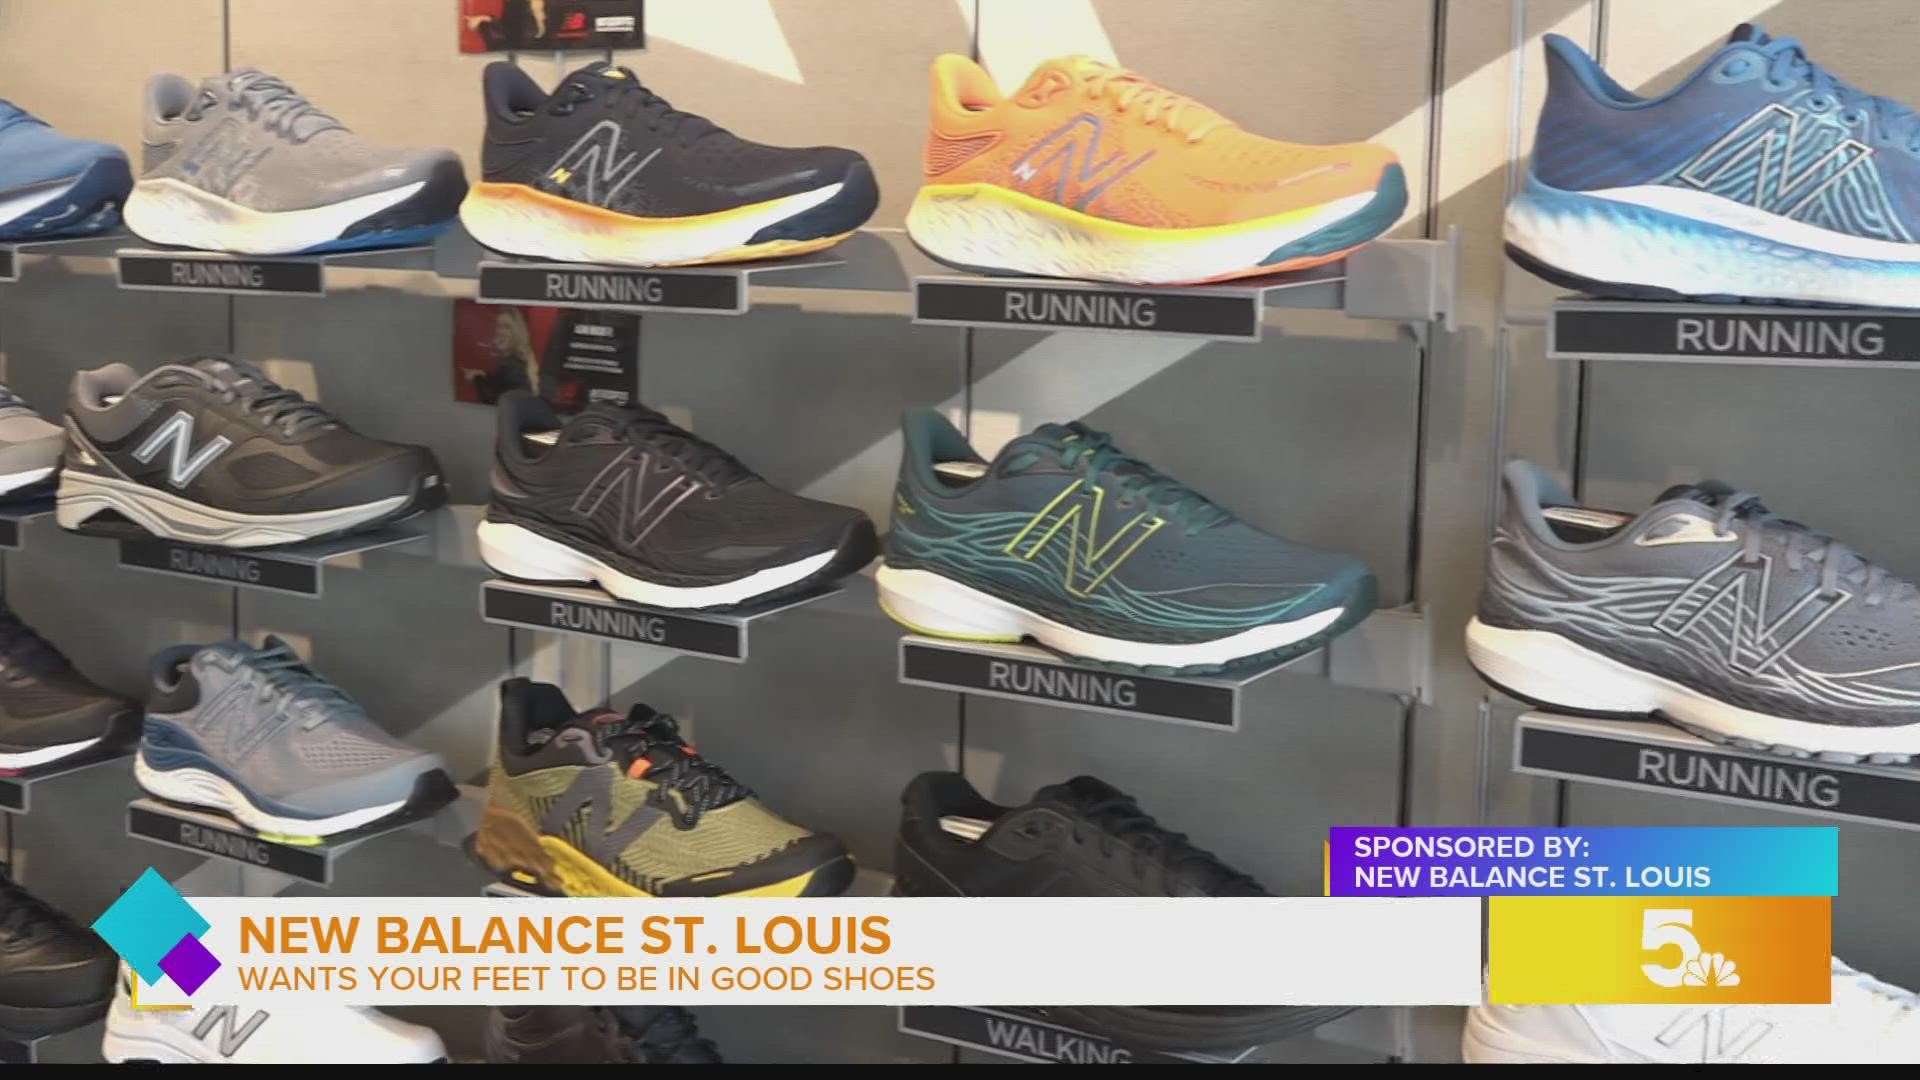 New Balance St. Louis wants your feet to be in good shoes